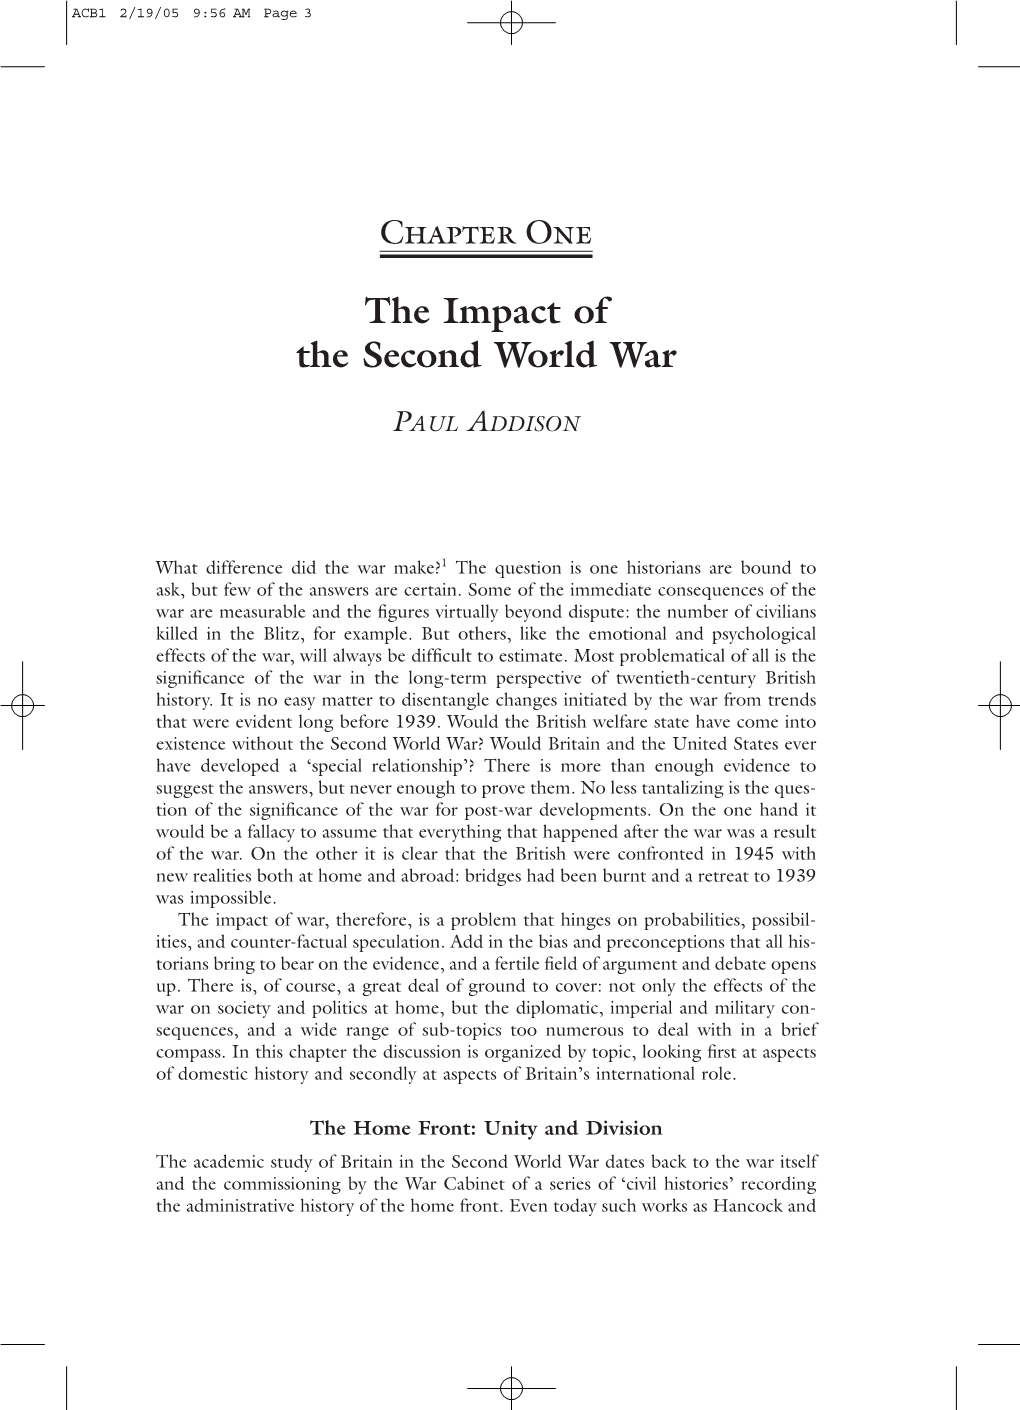 The Impact of the Second World War PAUL ADDISON